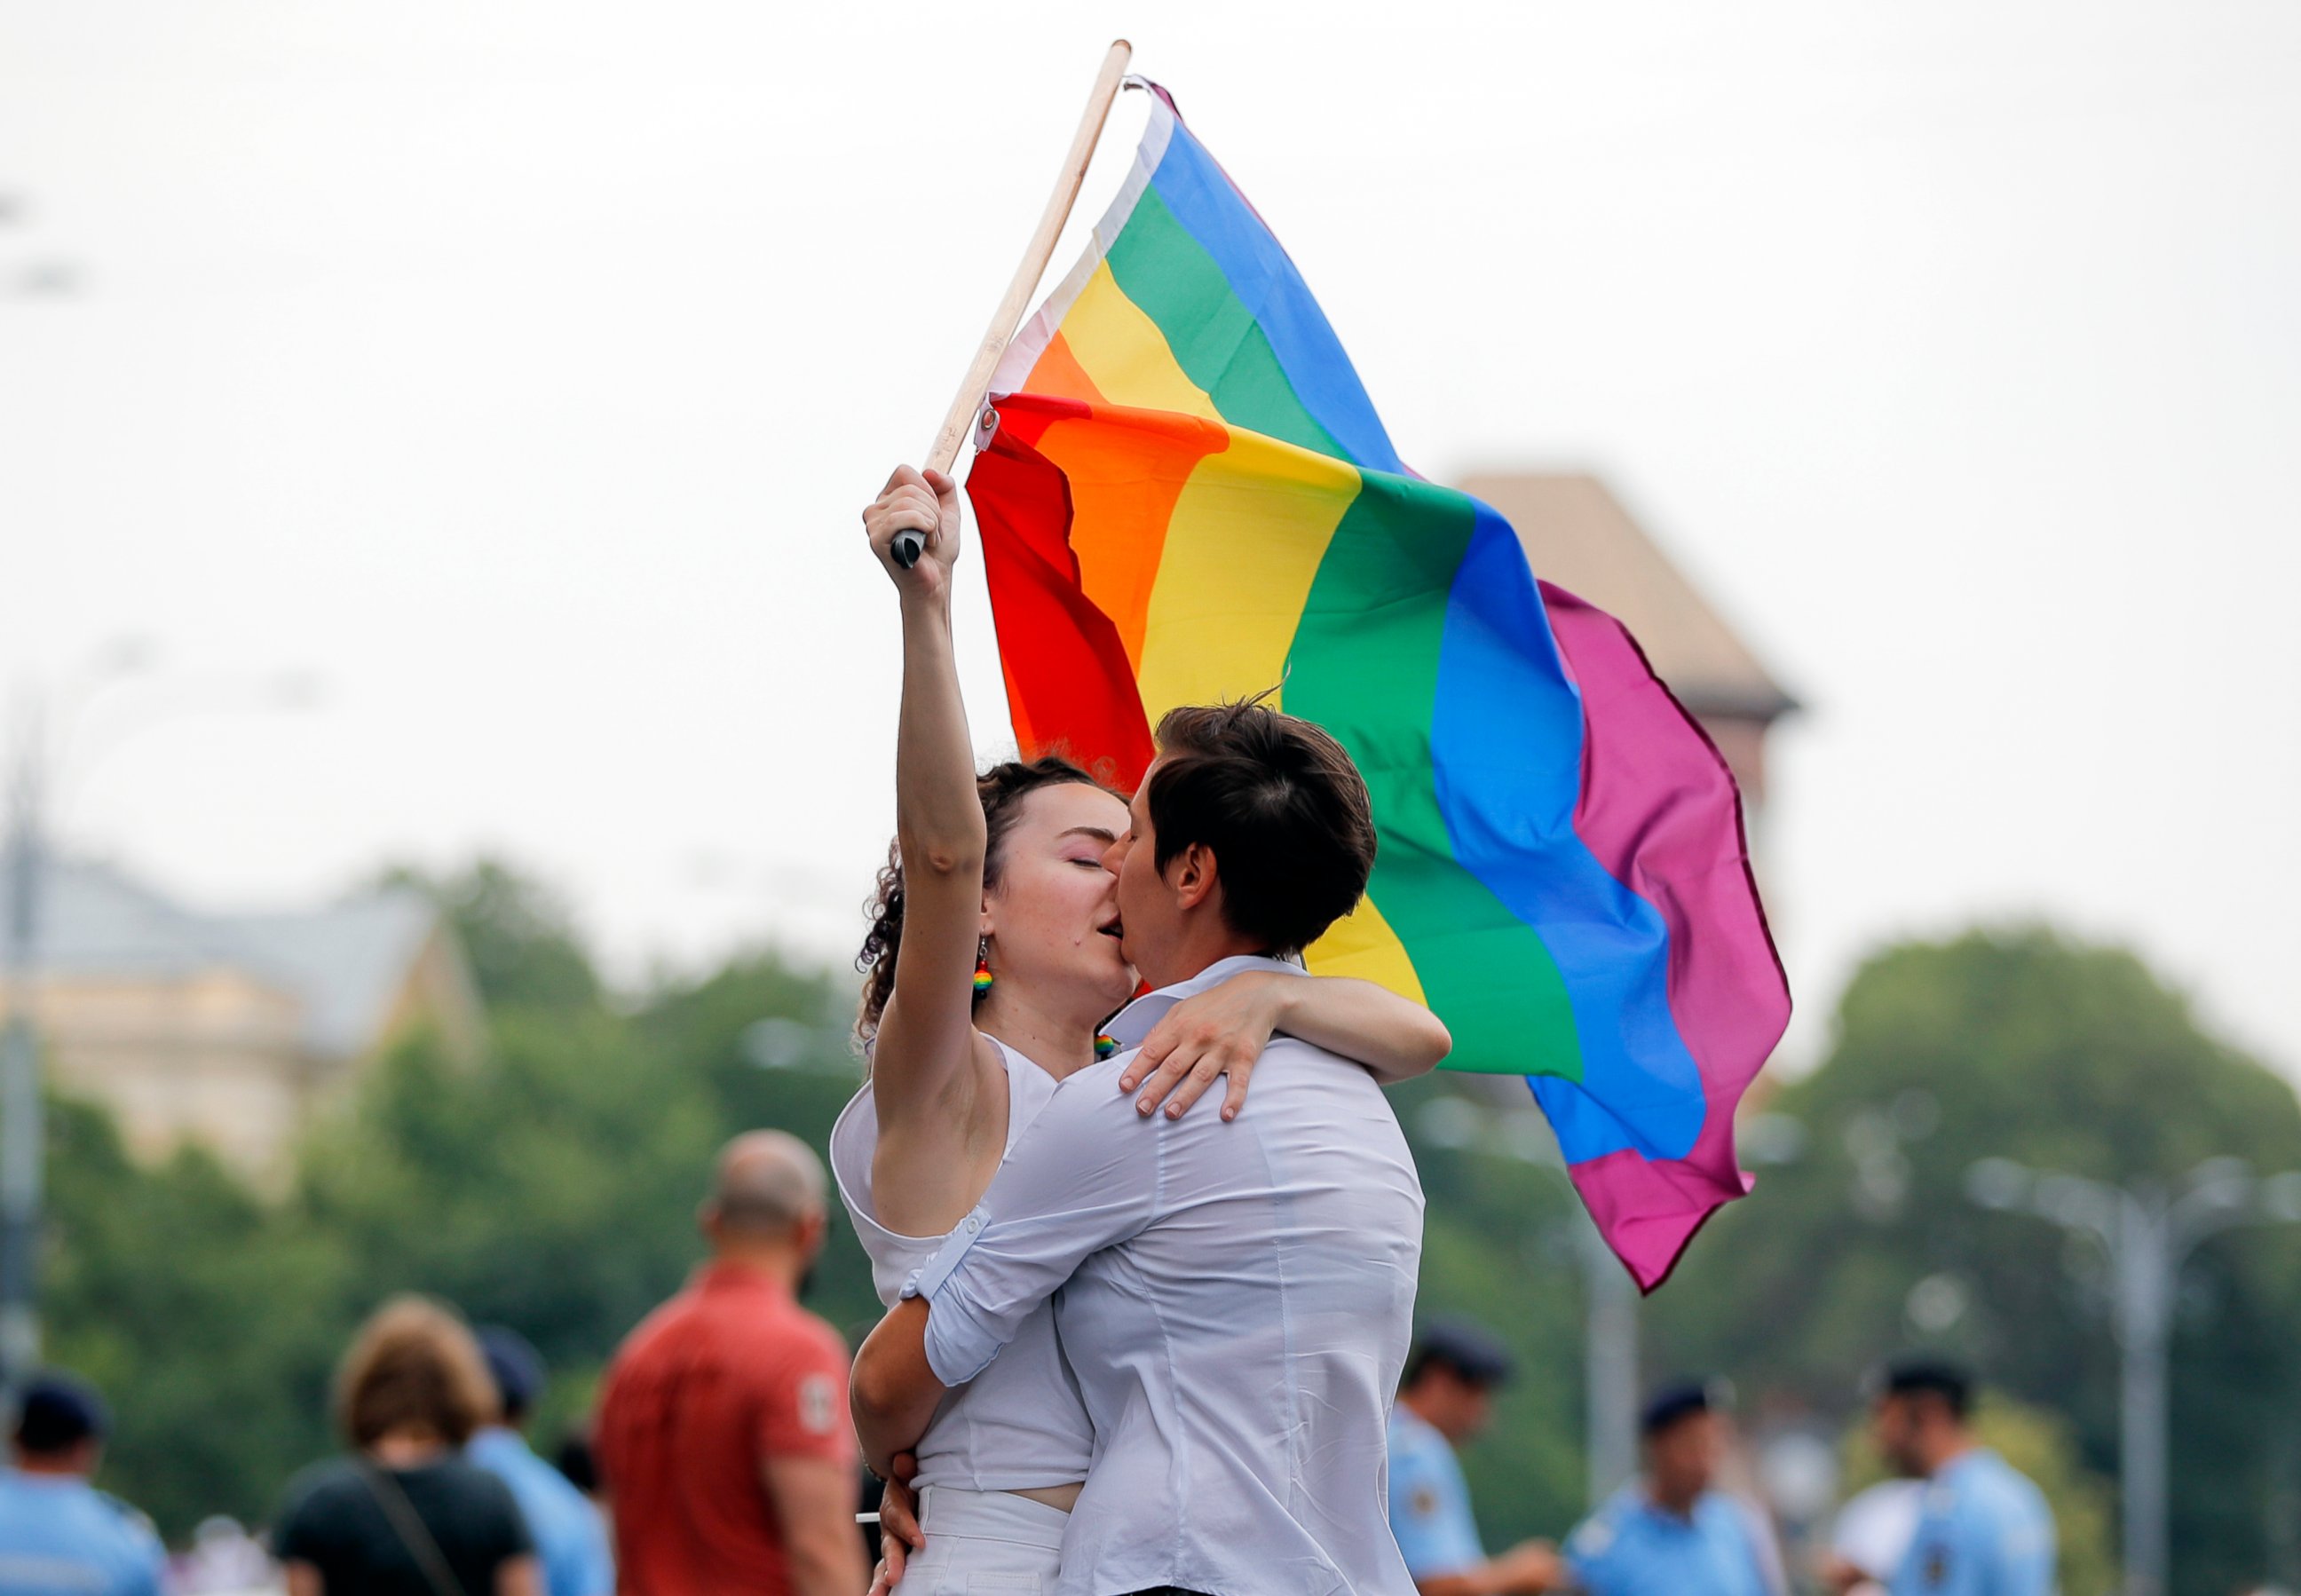 PHOTO: In this Saturday, June 9, 2018 file photo, two girls kiss holding a rainbow flag during the gay pride parade in Bucharest, Romania. Romania's top court has ruled that gay couples should have the same family rights as heterosexuals.